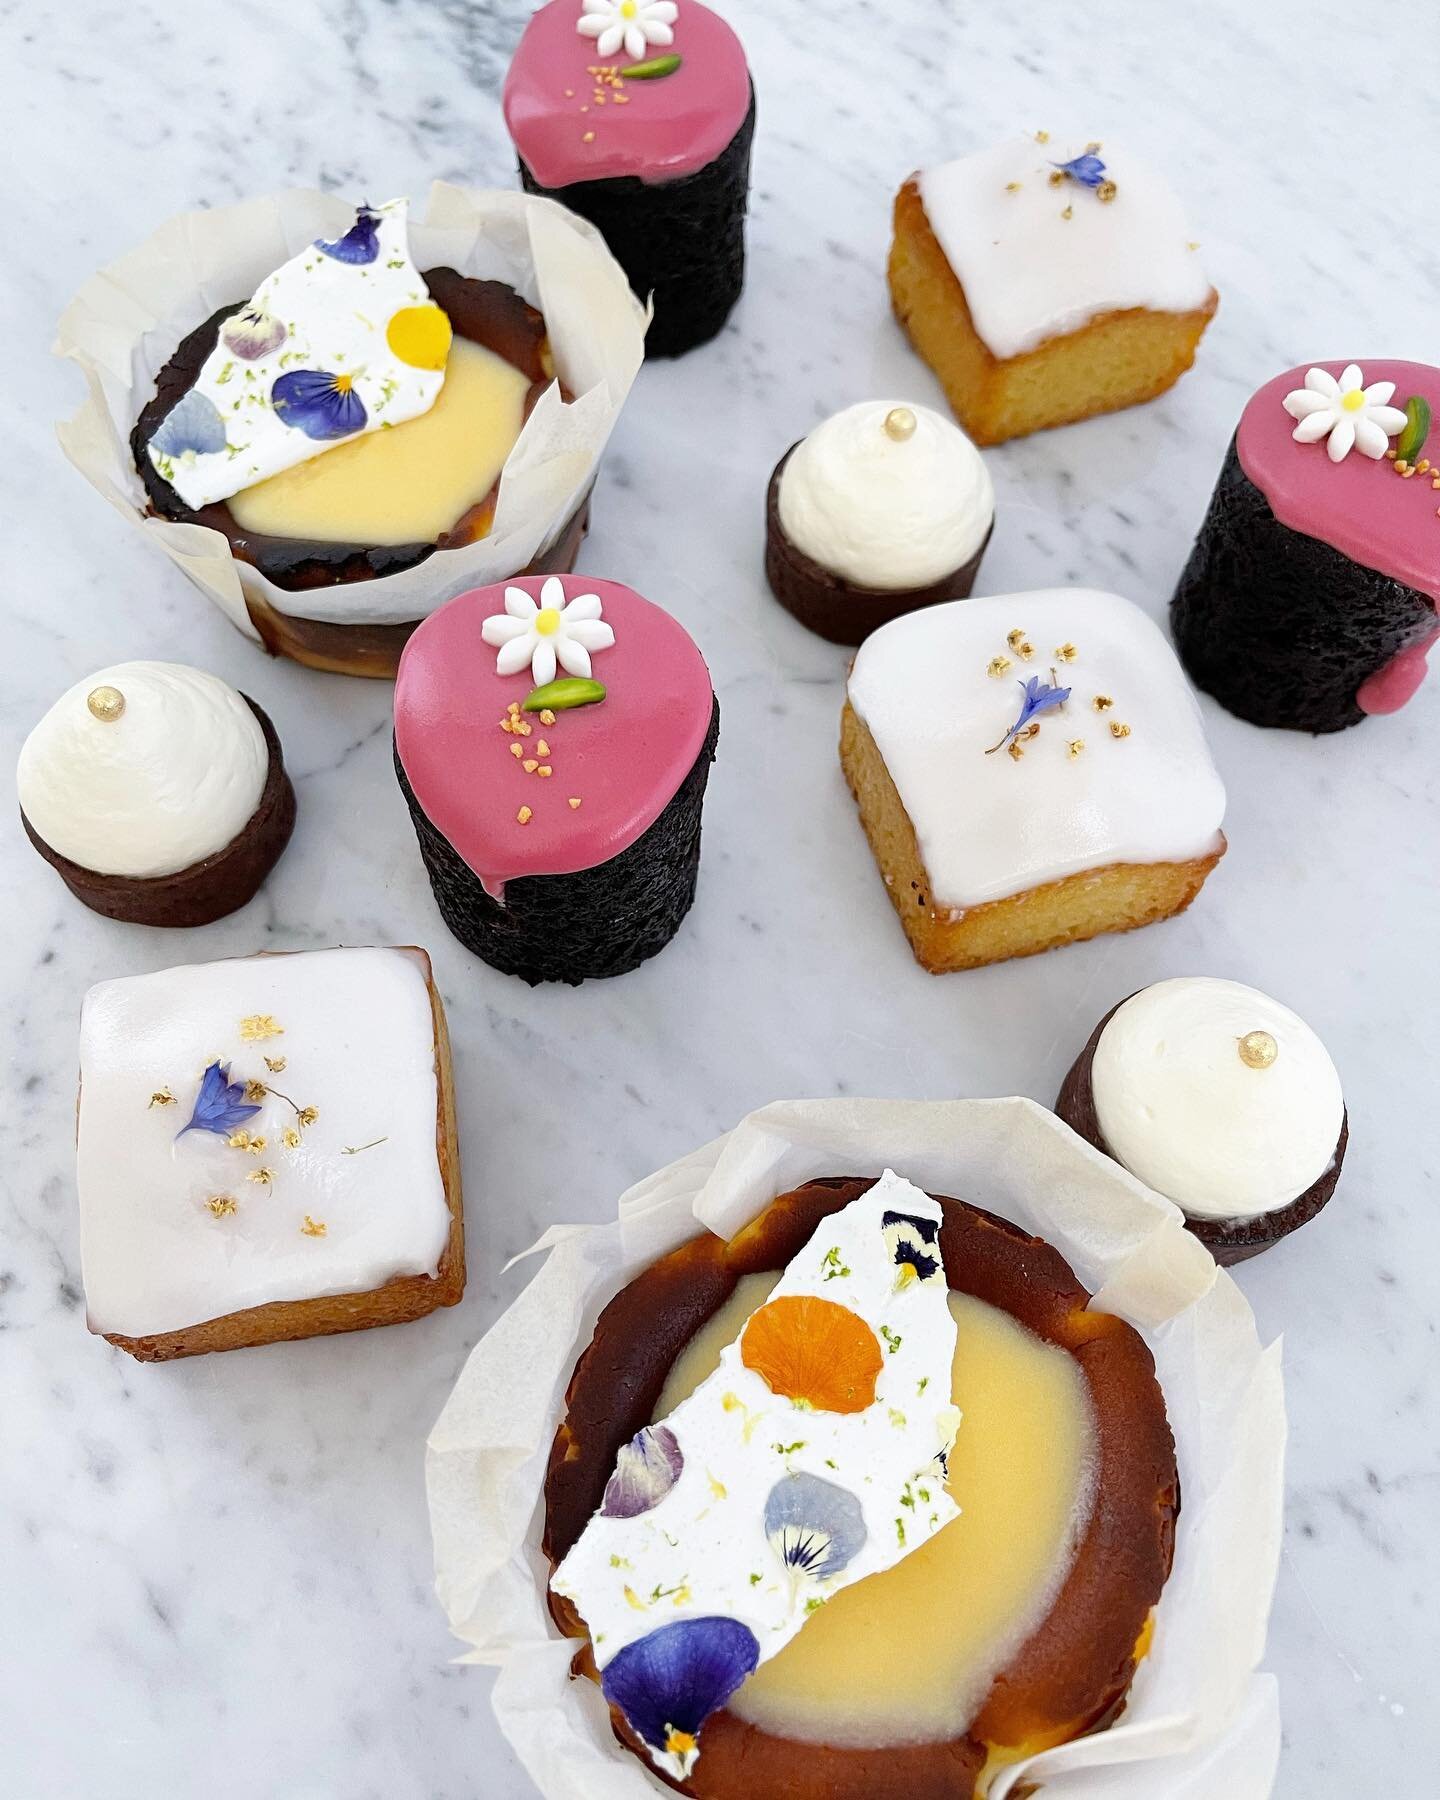 MOTHER&rsquo;S DAY 2022: Sunday 8th May! 

Enjoy high tea at home with Mum and the family with our delicious high tea box. This years handcraft sweet items includes: 

&bull;Mini banoffee tart
&bull;Burnt Basque cheesecake with lemon curd &amp; flora